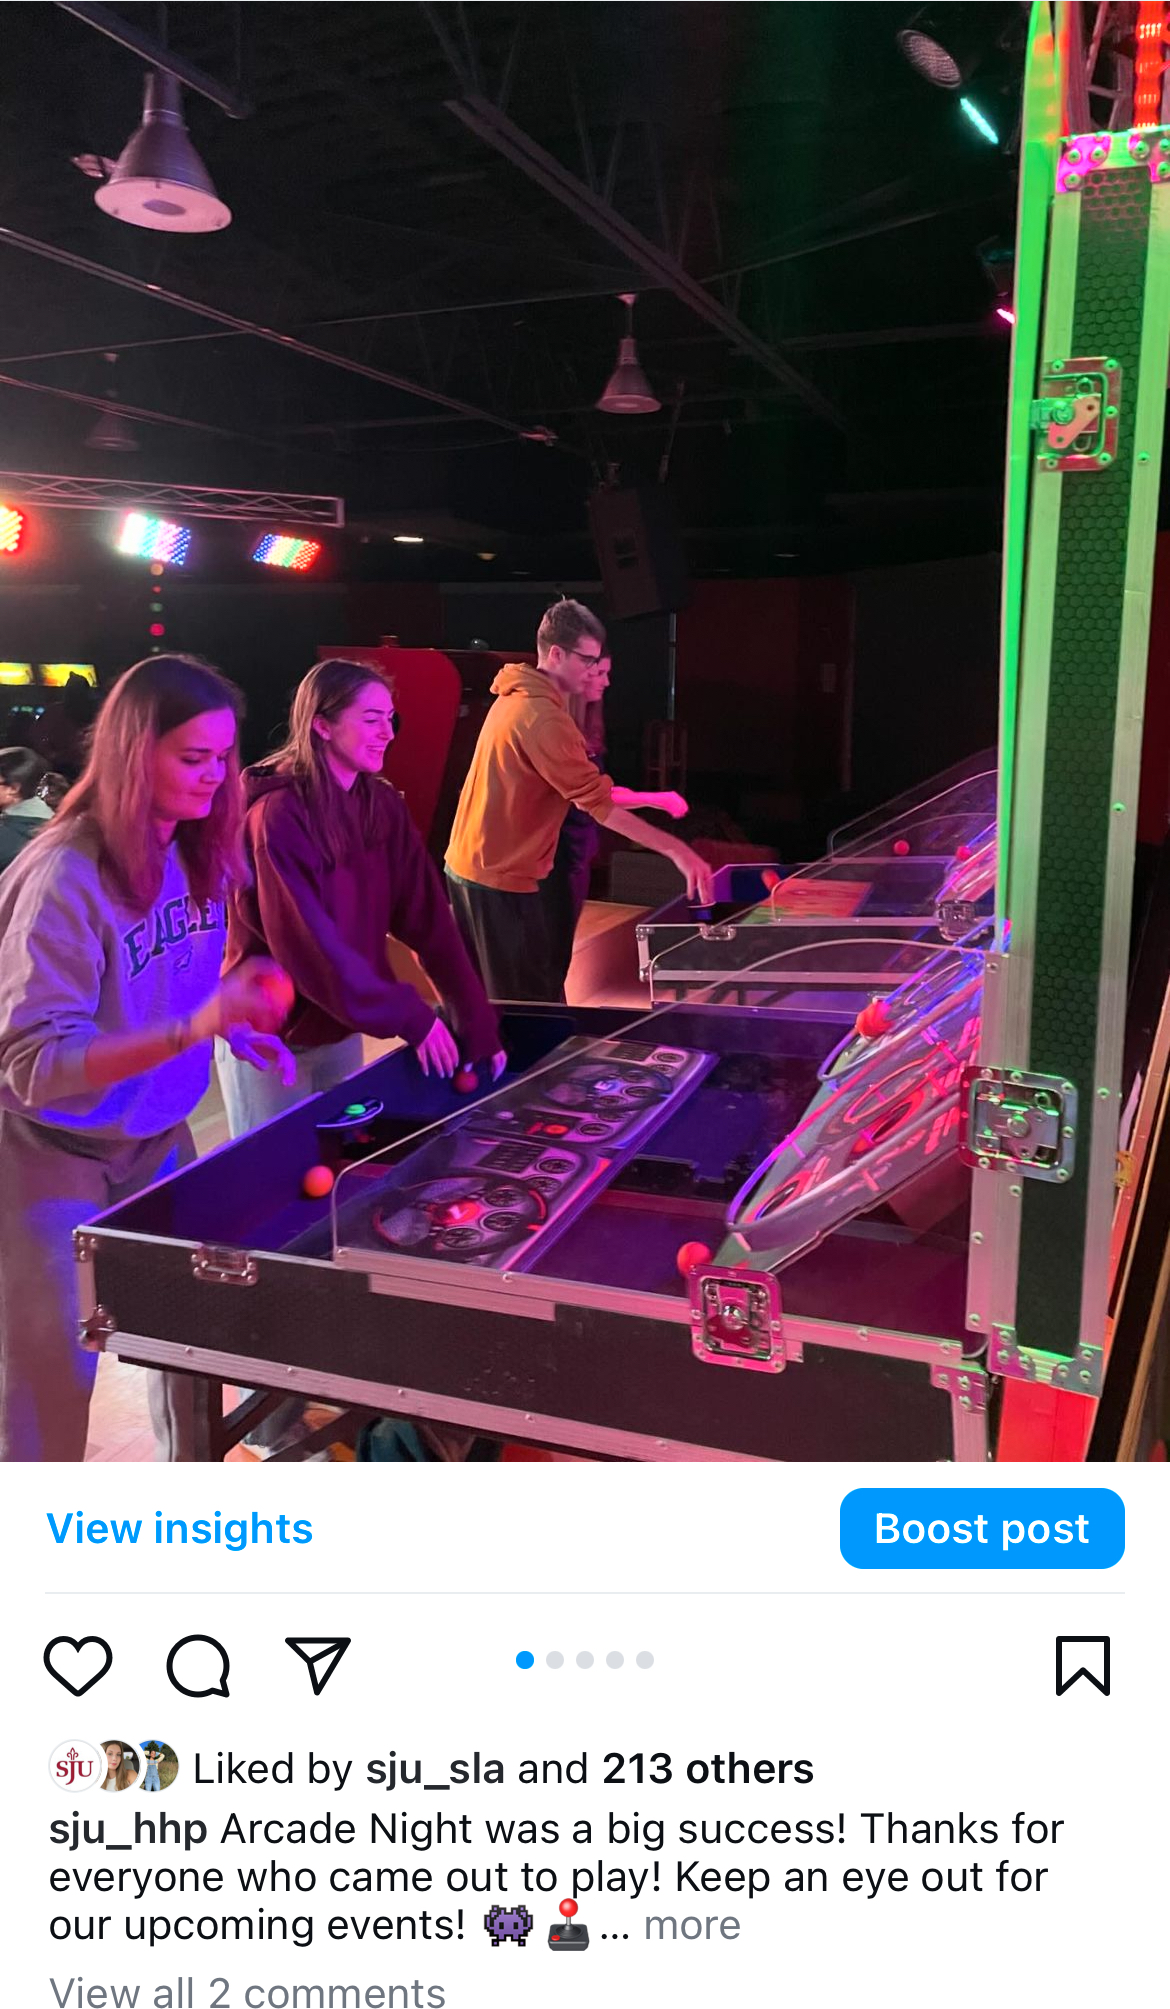 This image is a recap post from an arcade event for students. There are four students playing some kind of arcade game with neon lighting shining around them